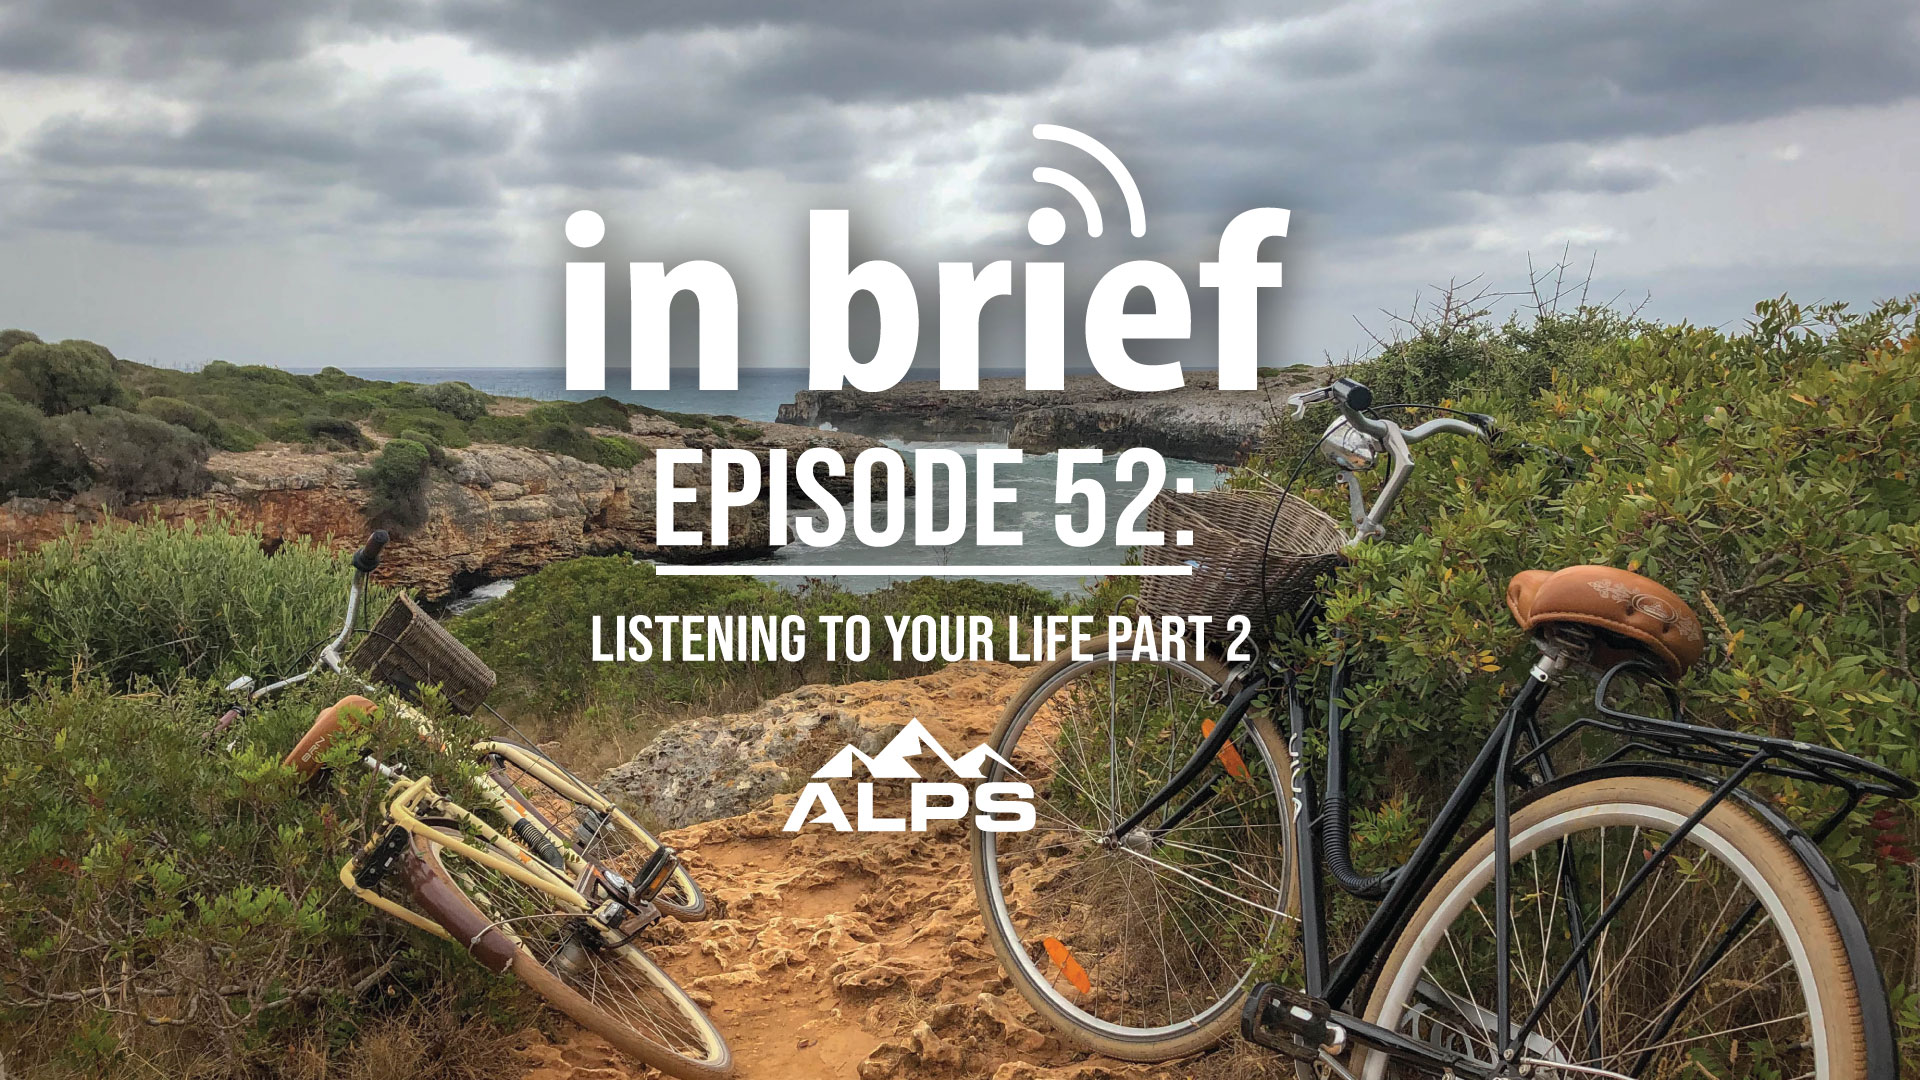 ALPS In Brief – Episode 52: Listening to Your Life Part 2